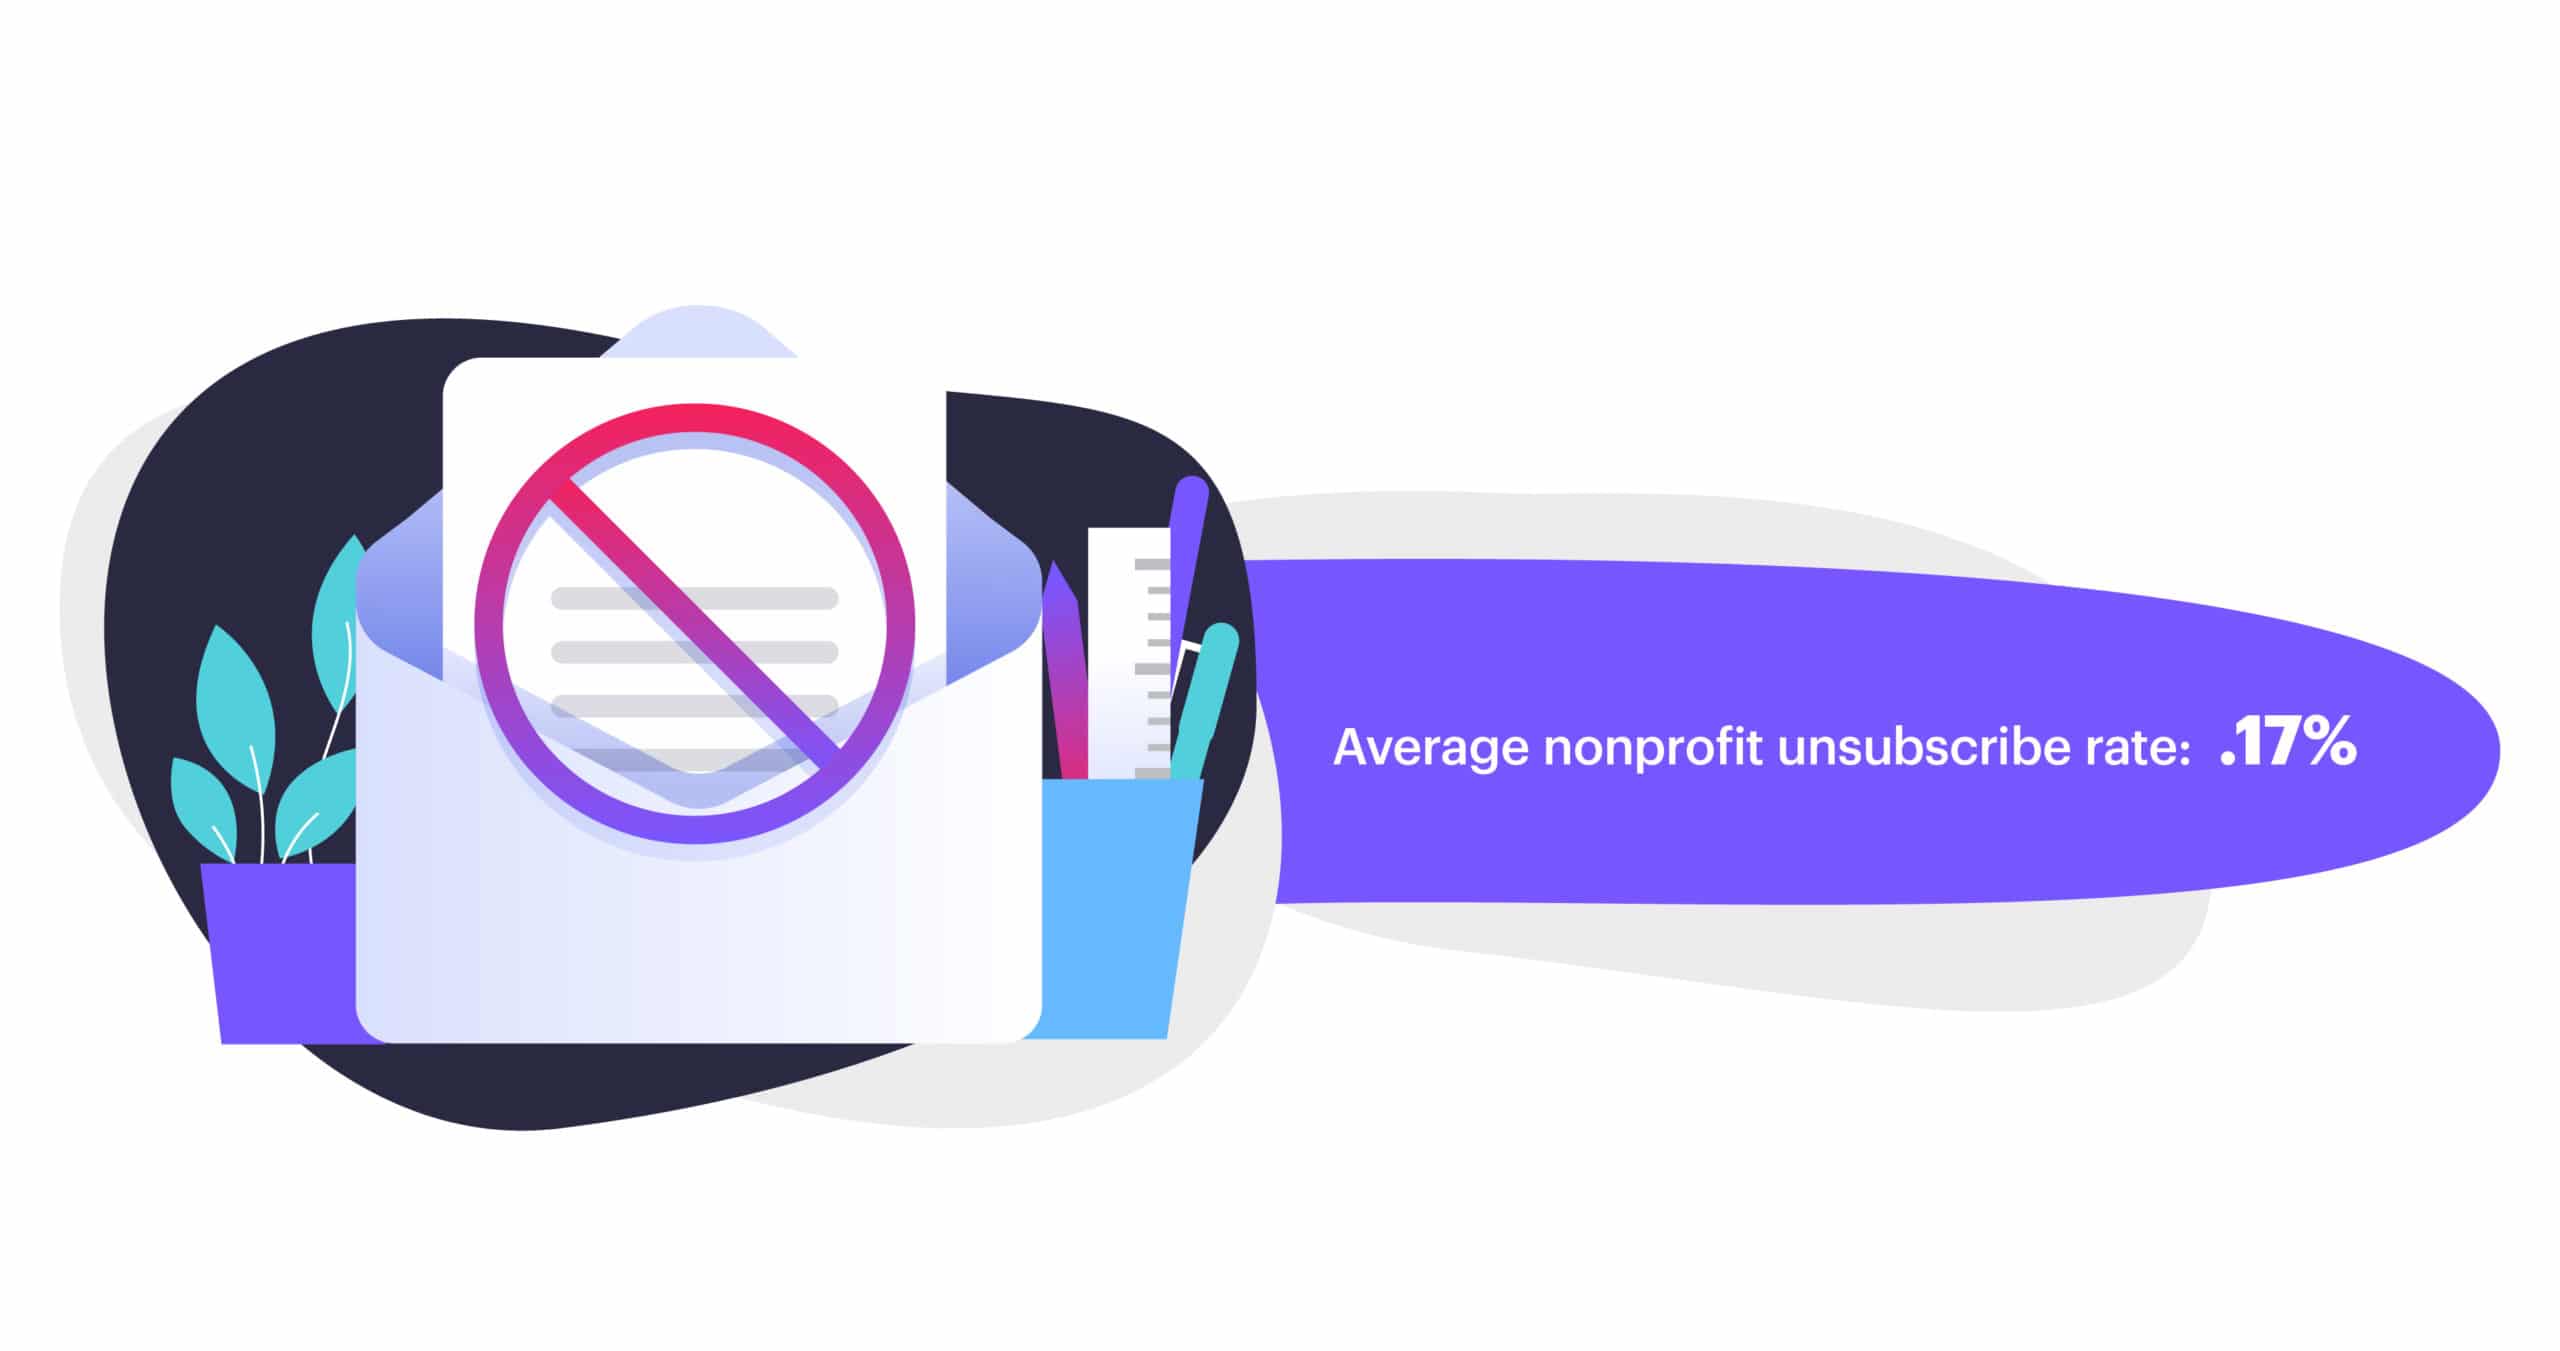 Unsubscribe rate for nonprofit emails was an average of 0.17%